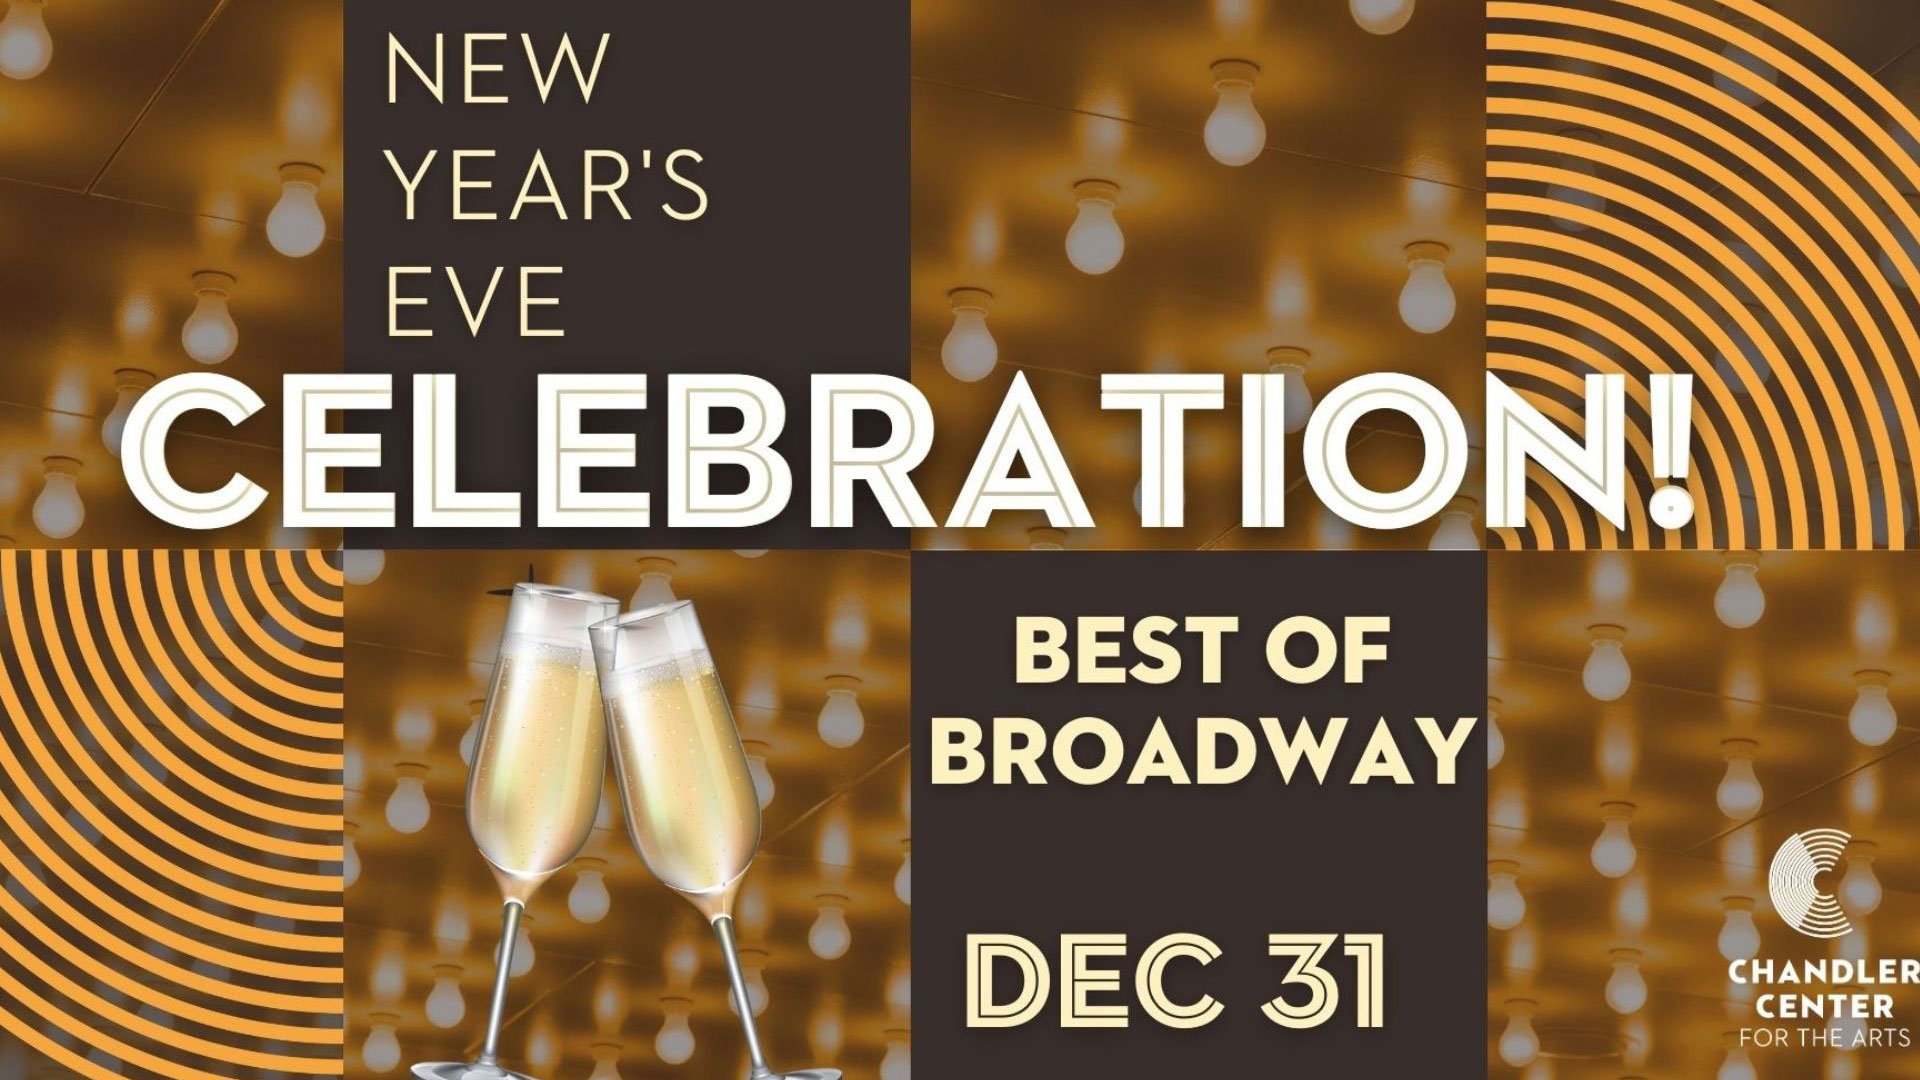 New Year’s Eve Celebration: Best of Broadway